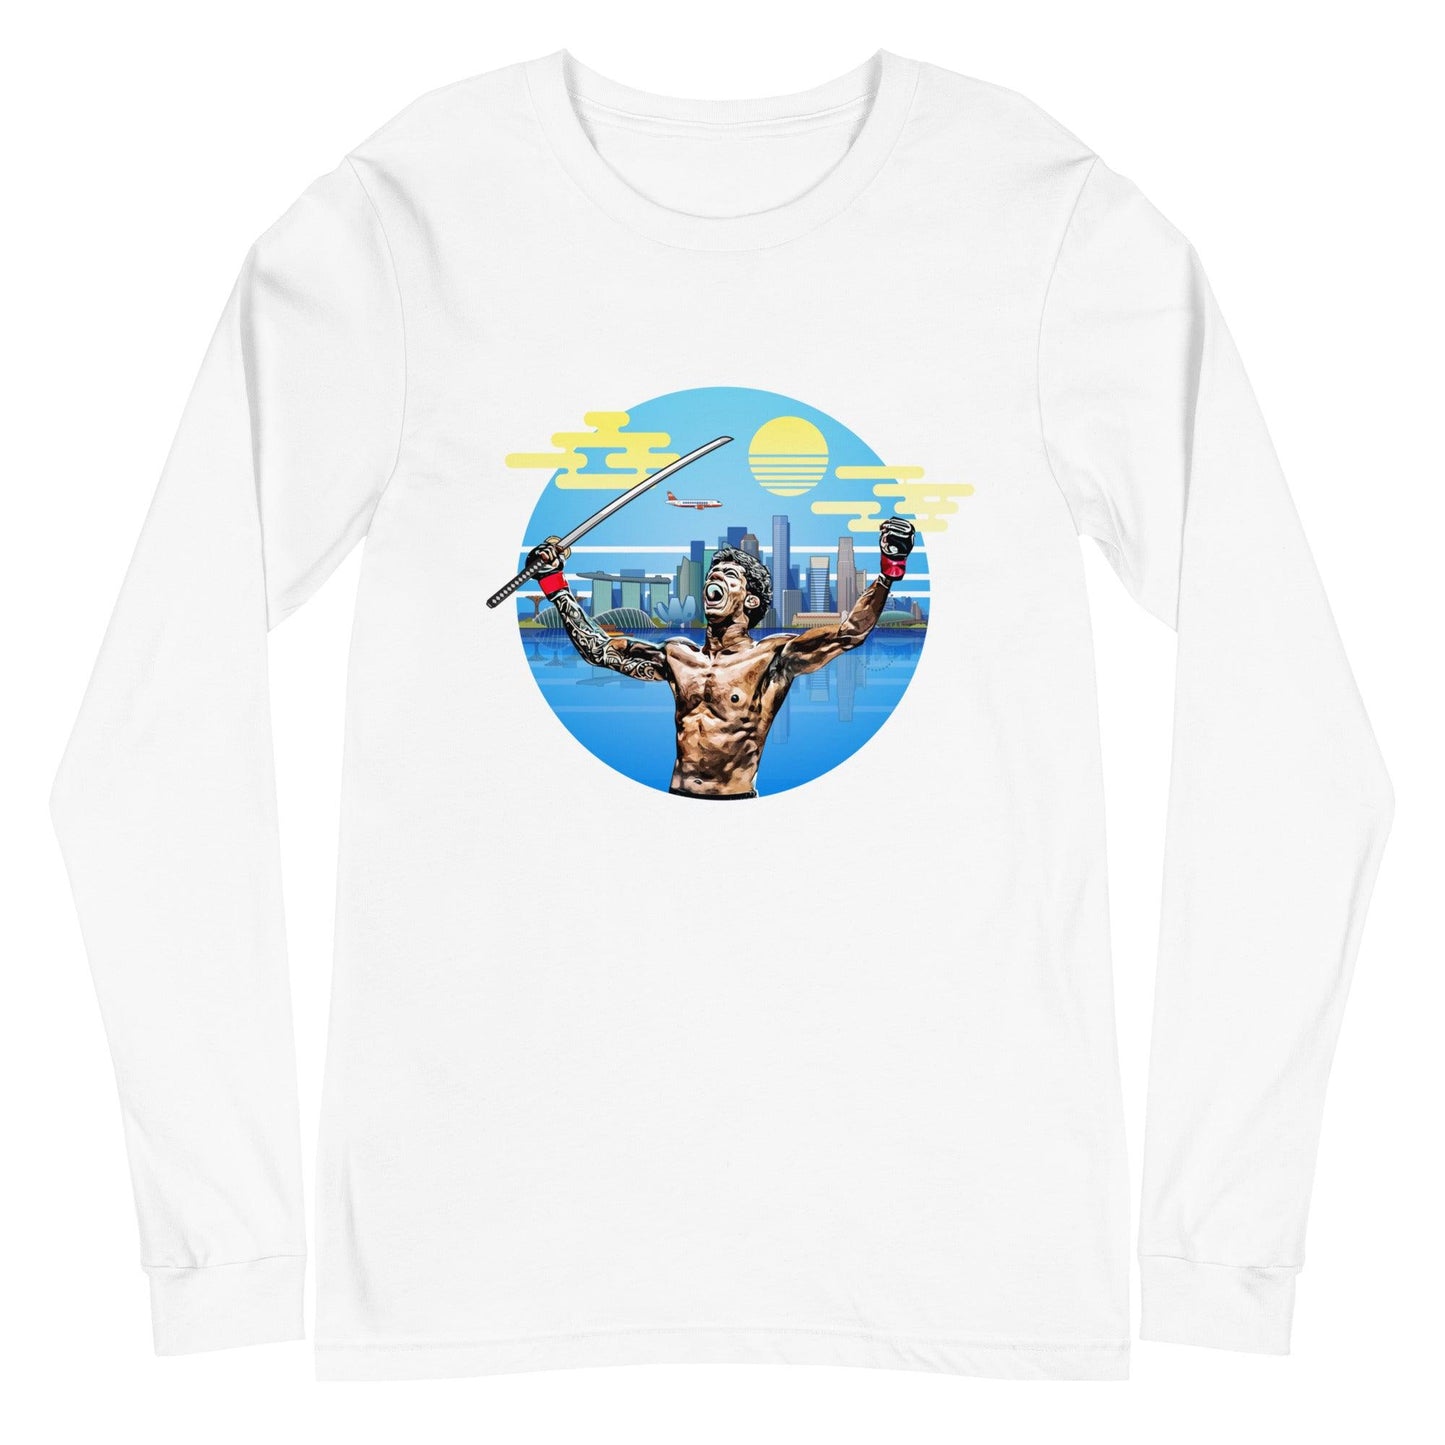 Adriano Moraes "Taking Over" Long Sleeve Tee - Fan Arch